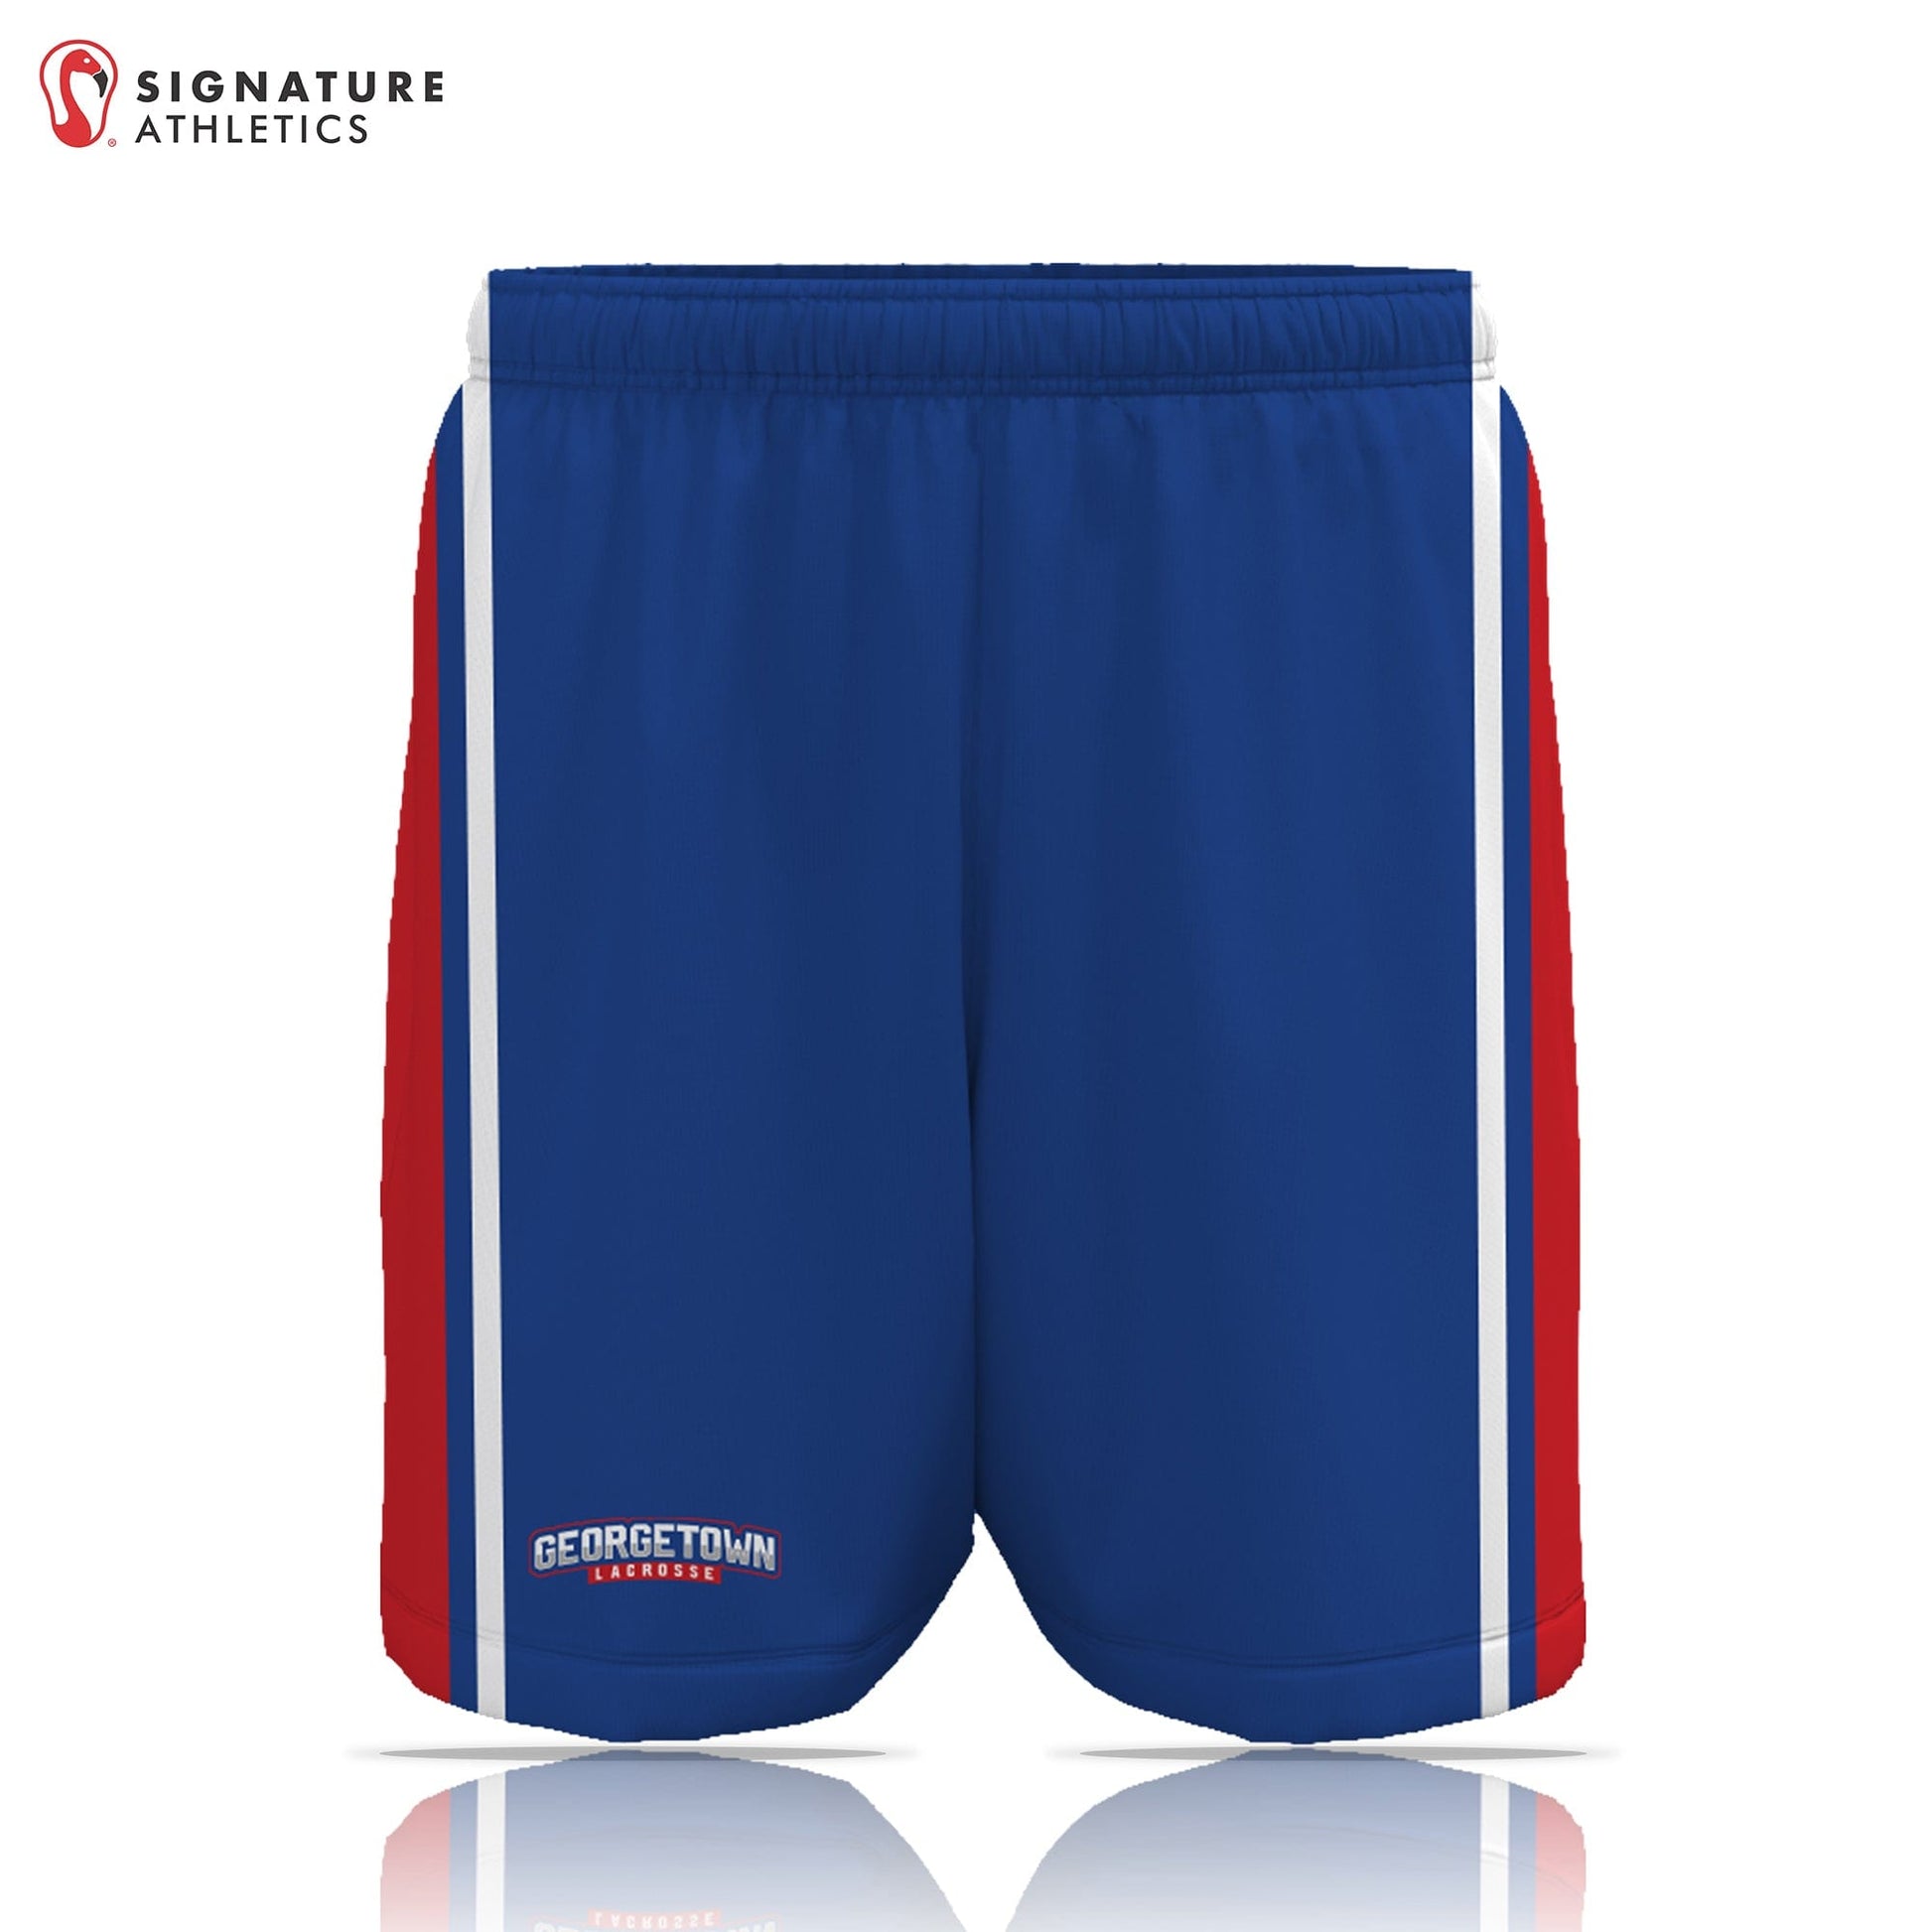 Georgetown Youth Lacrosse Men's Player Game Short: 7th/8th (Seniors) Signature Lacrosse